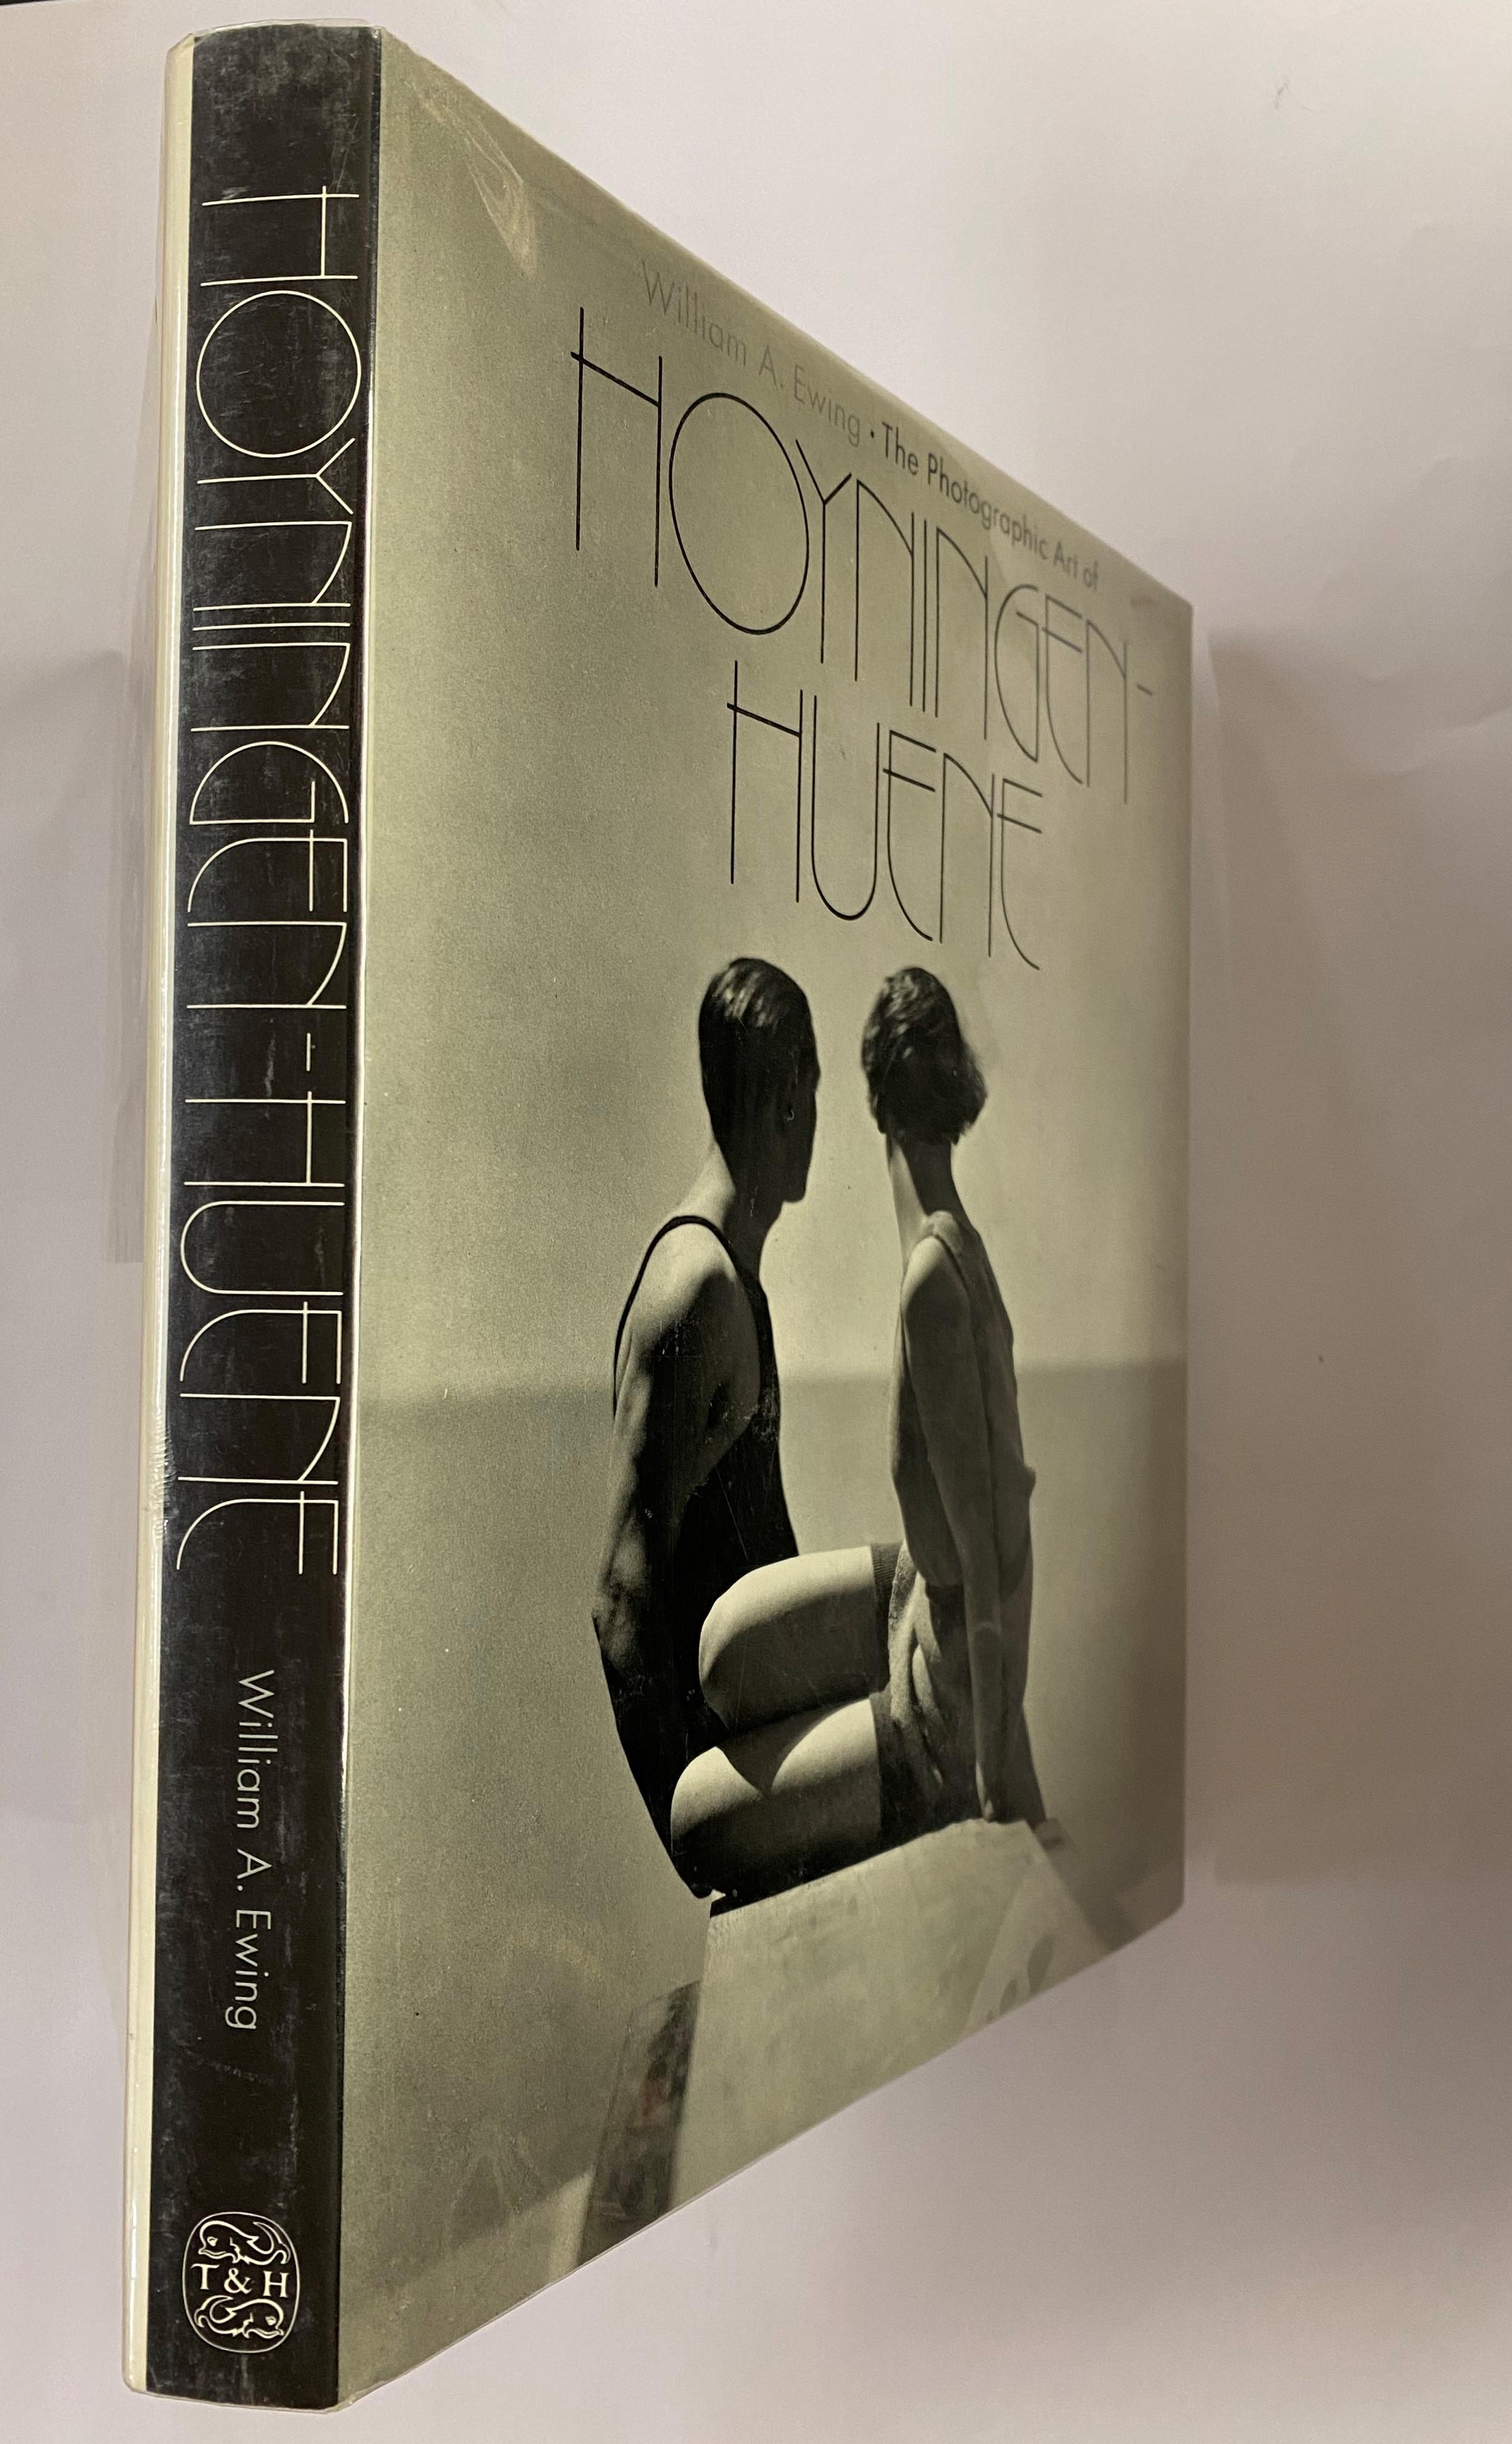 Photographic Art of Hoyningen-Huene by William A. Ewing, (Book) For Sale 9